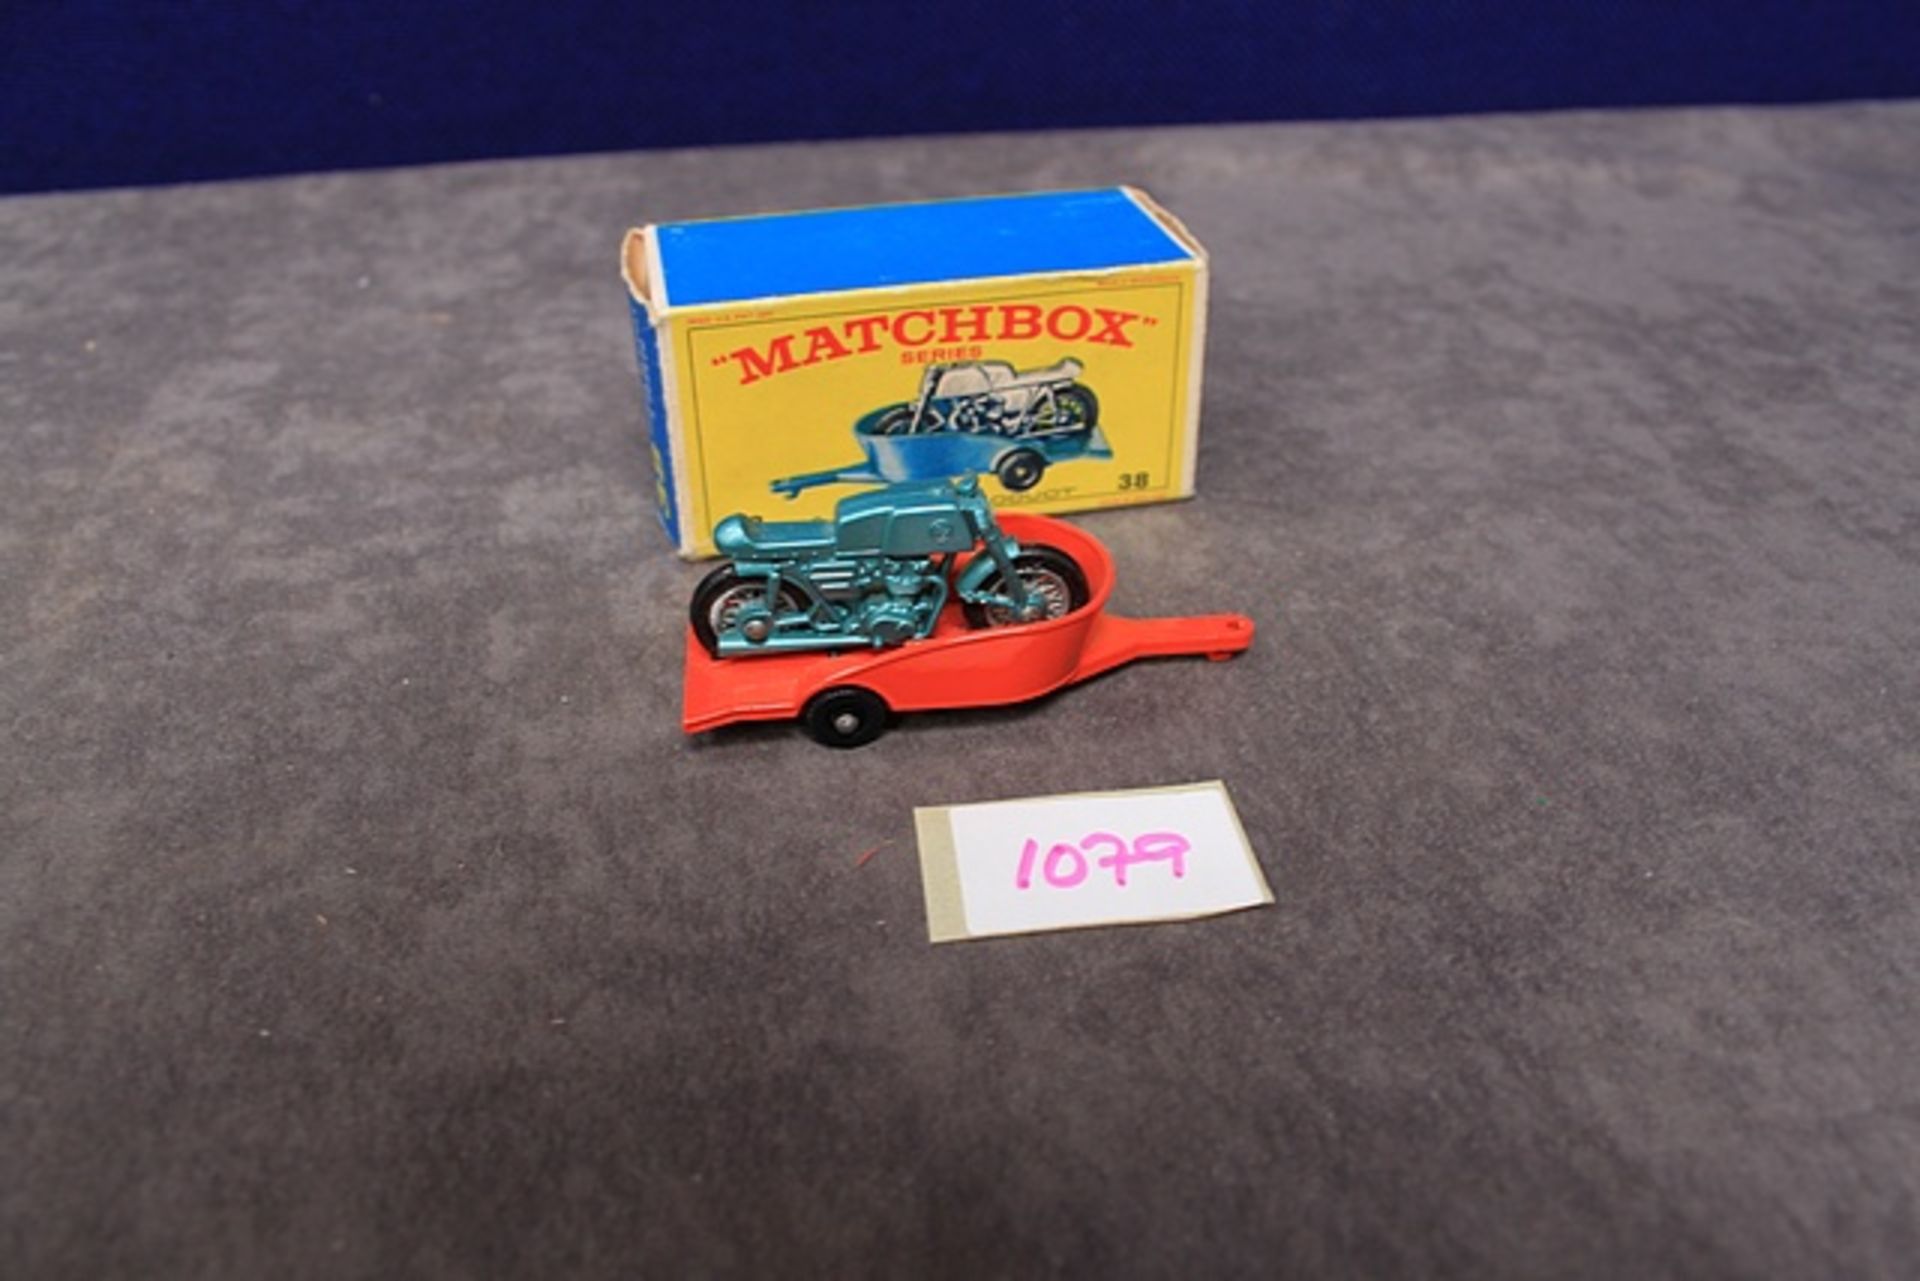 Mint Matchbox A Lesney Product #38 Honda Motor Cycles & Trailer no decals, orange trailer in a nr - Image 2 of 2